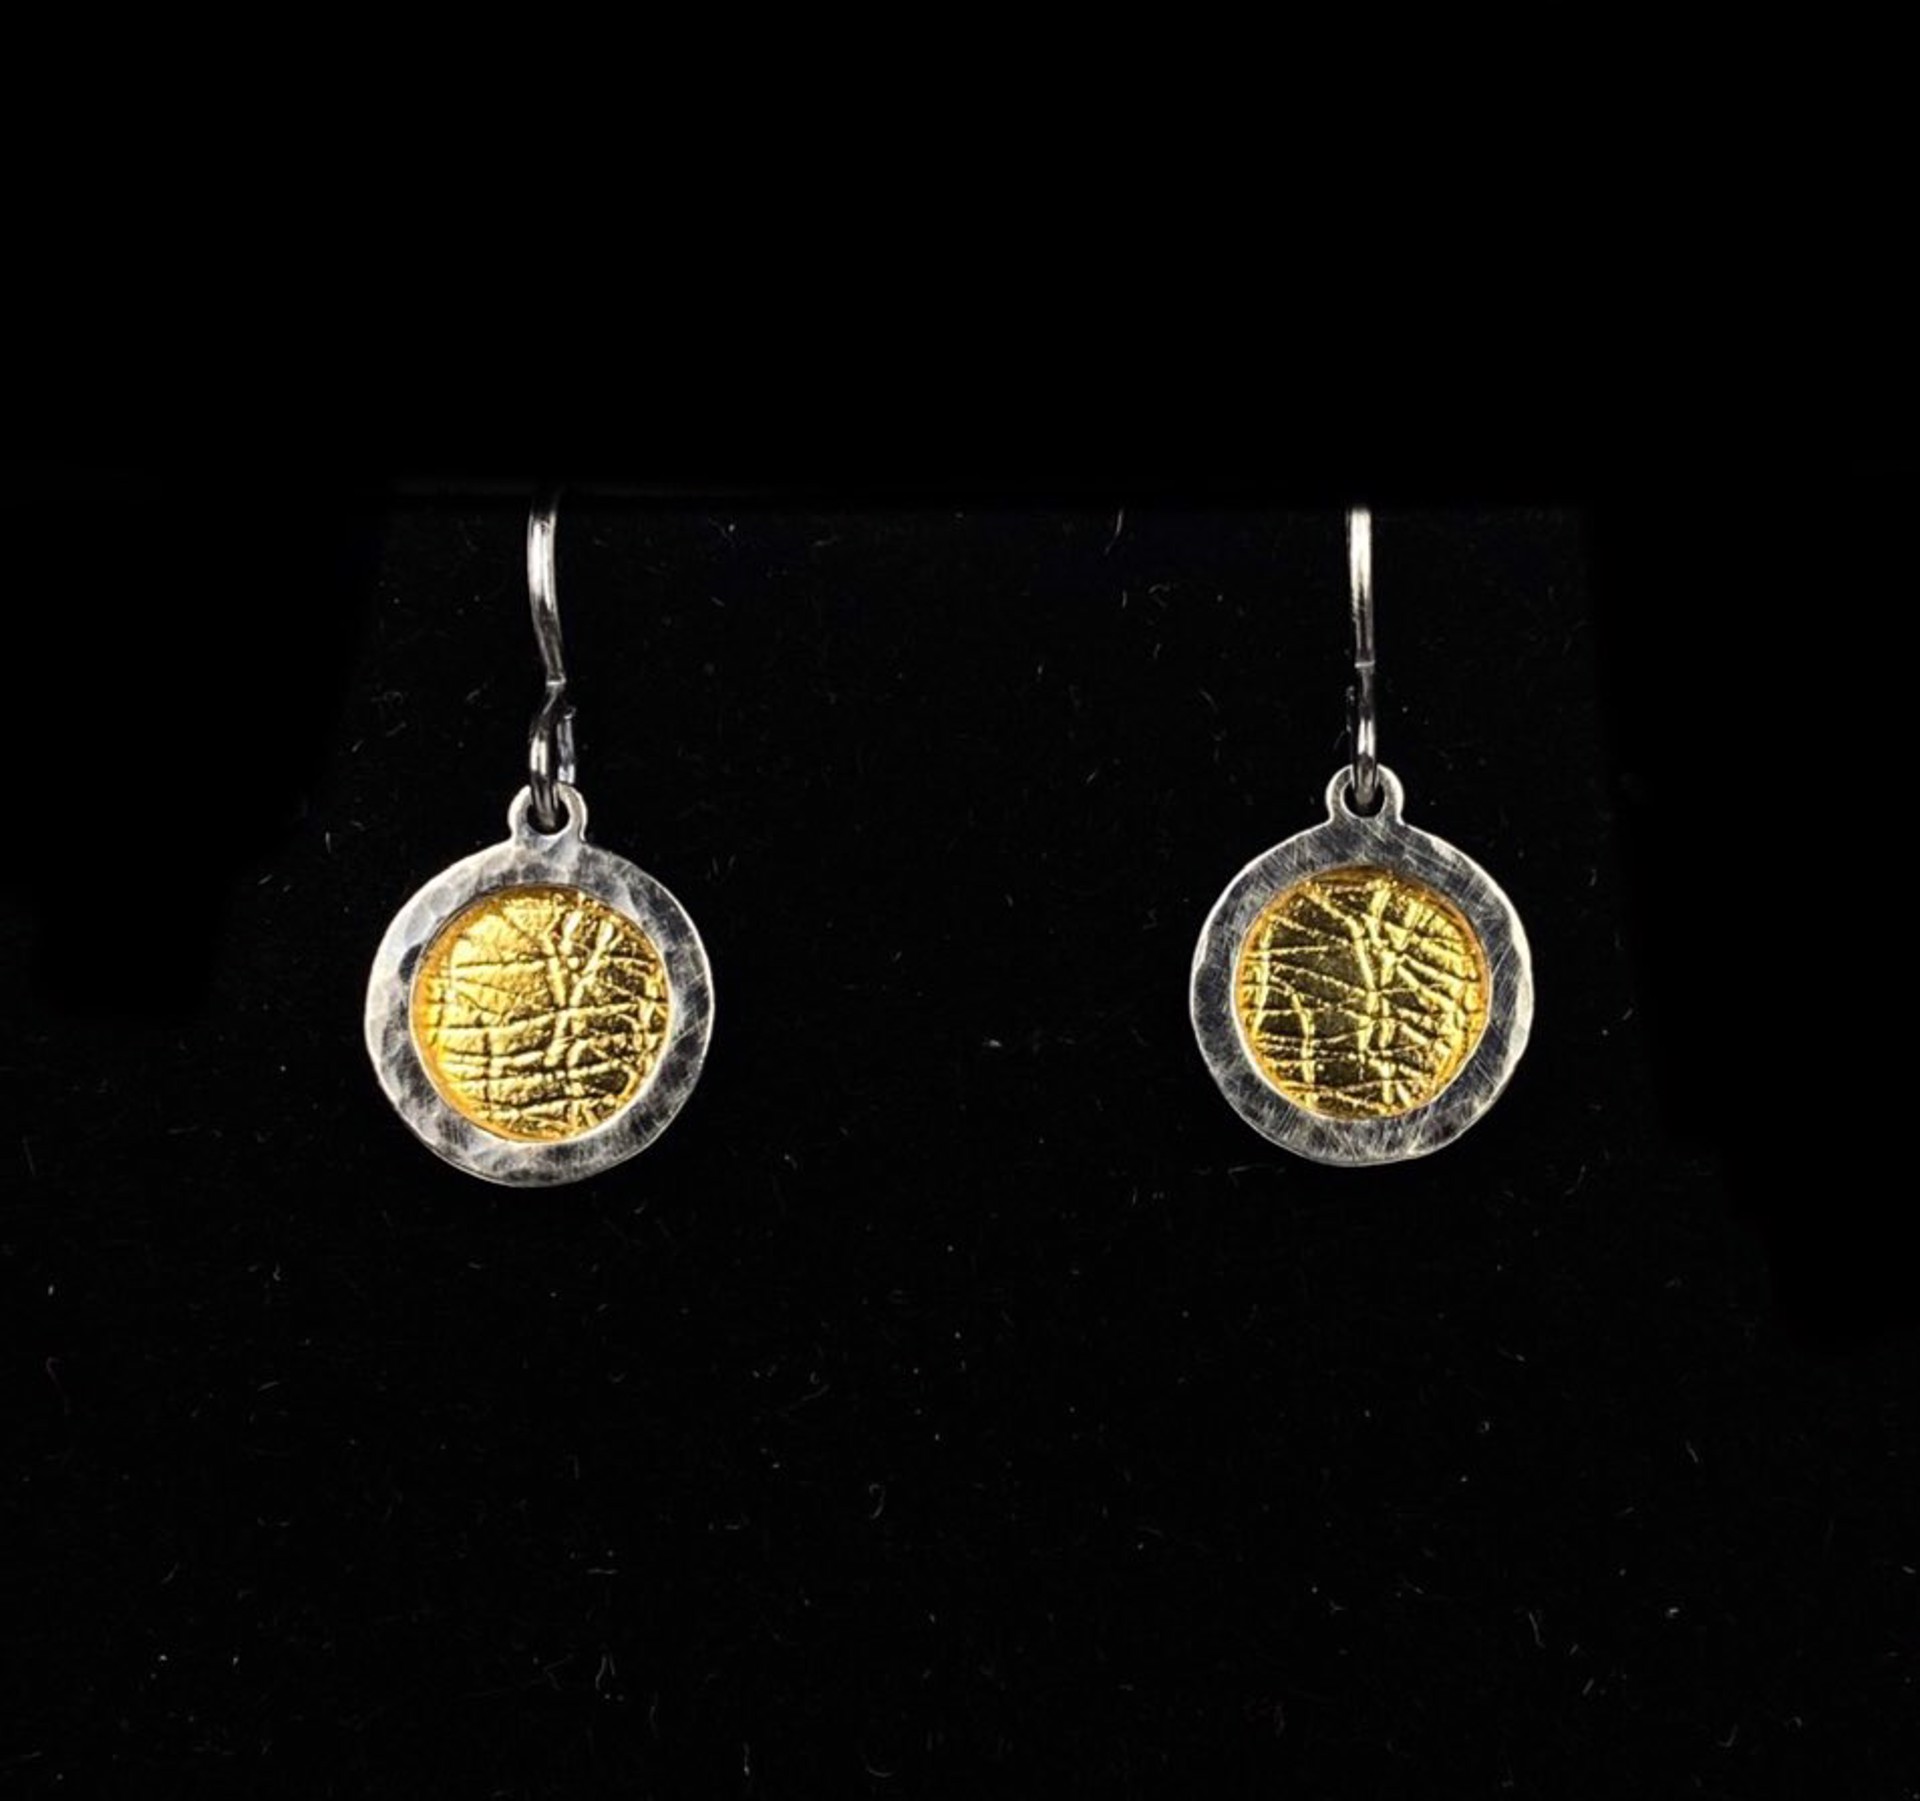 Fused 24K Gold Circle Earrings by Nichole Collins